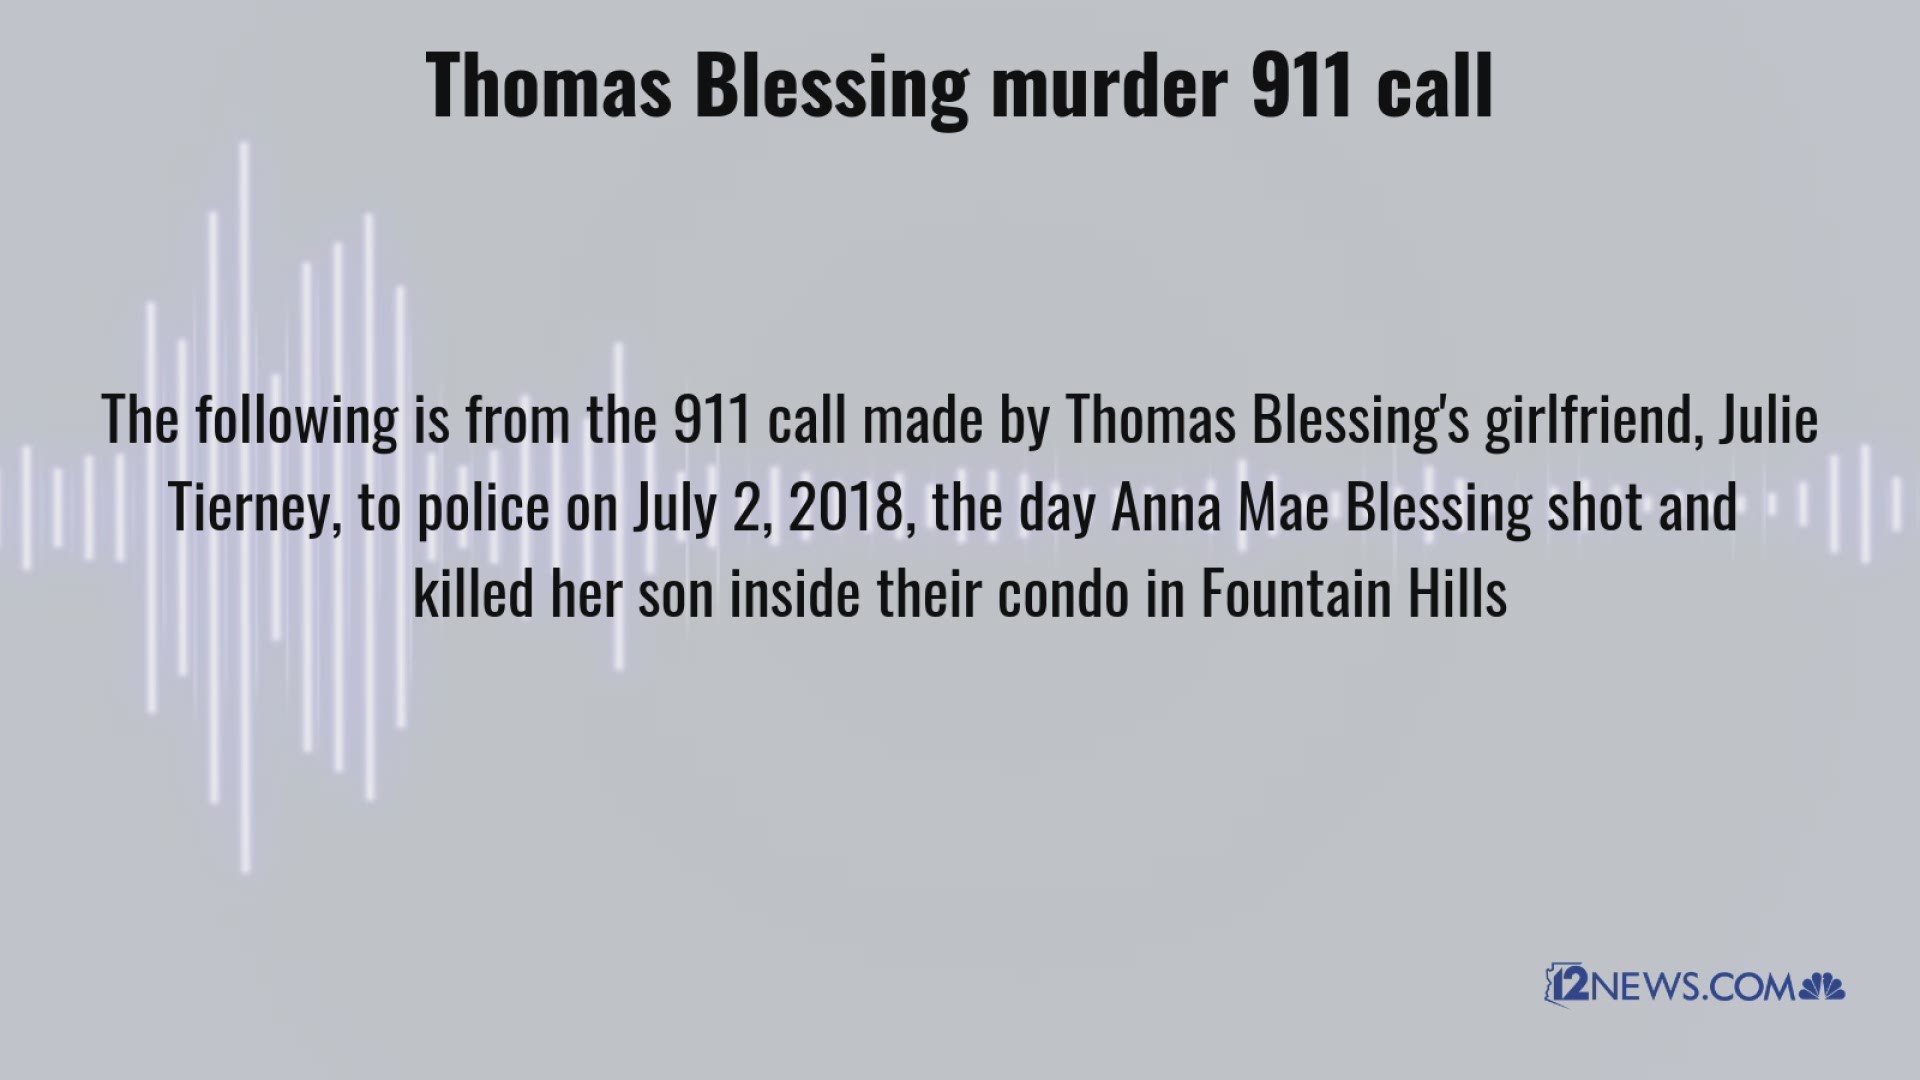 Anna Mae Blessing was 92 when she allegedly shot and killed her son Thomas Blessing inside a condo in Fountain Hills in July of 2018.